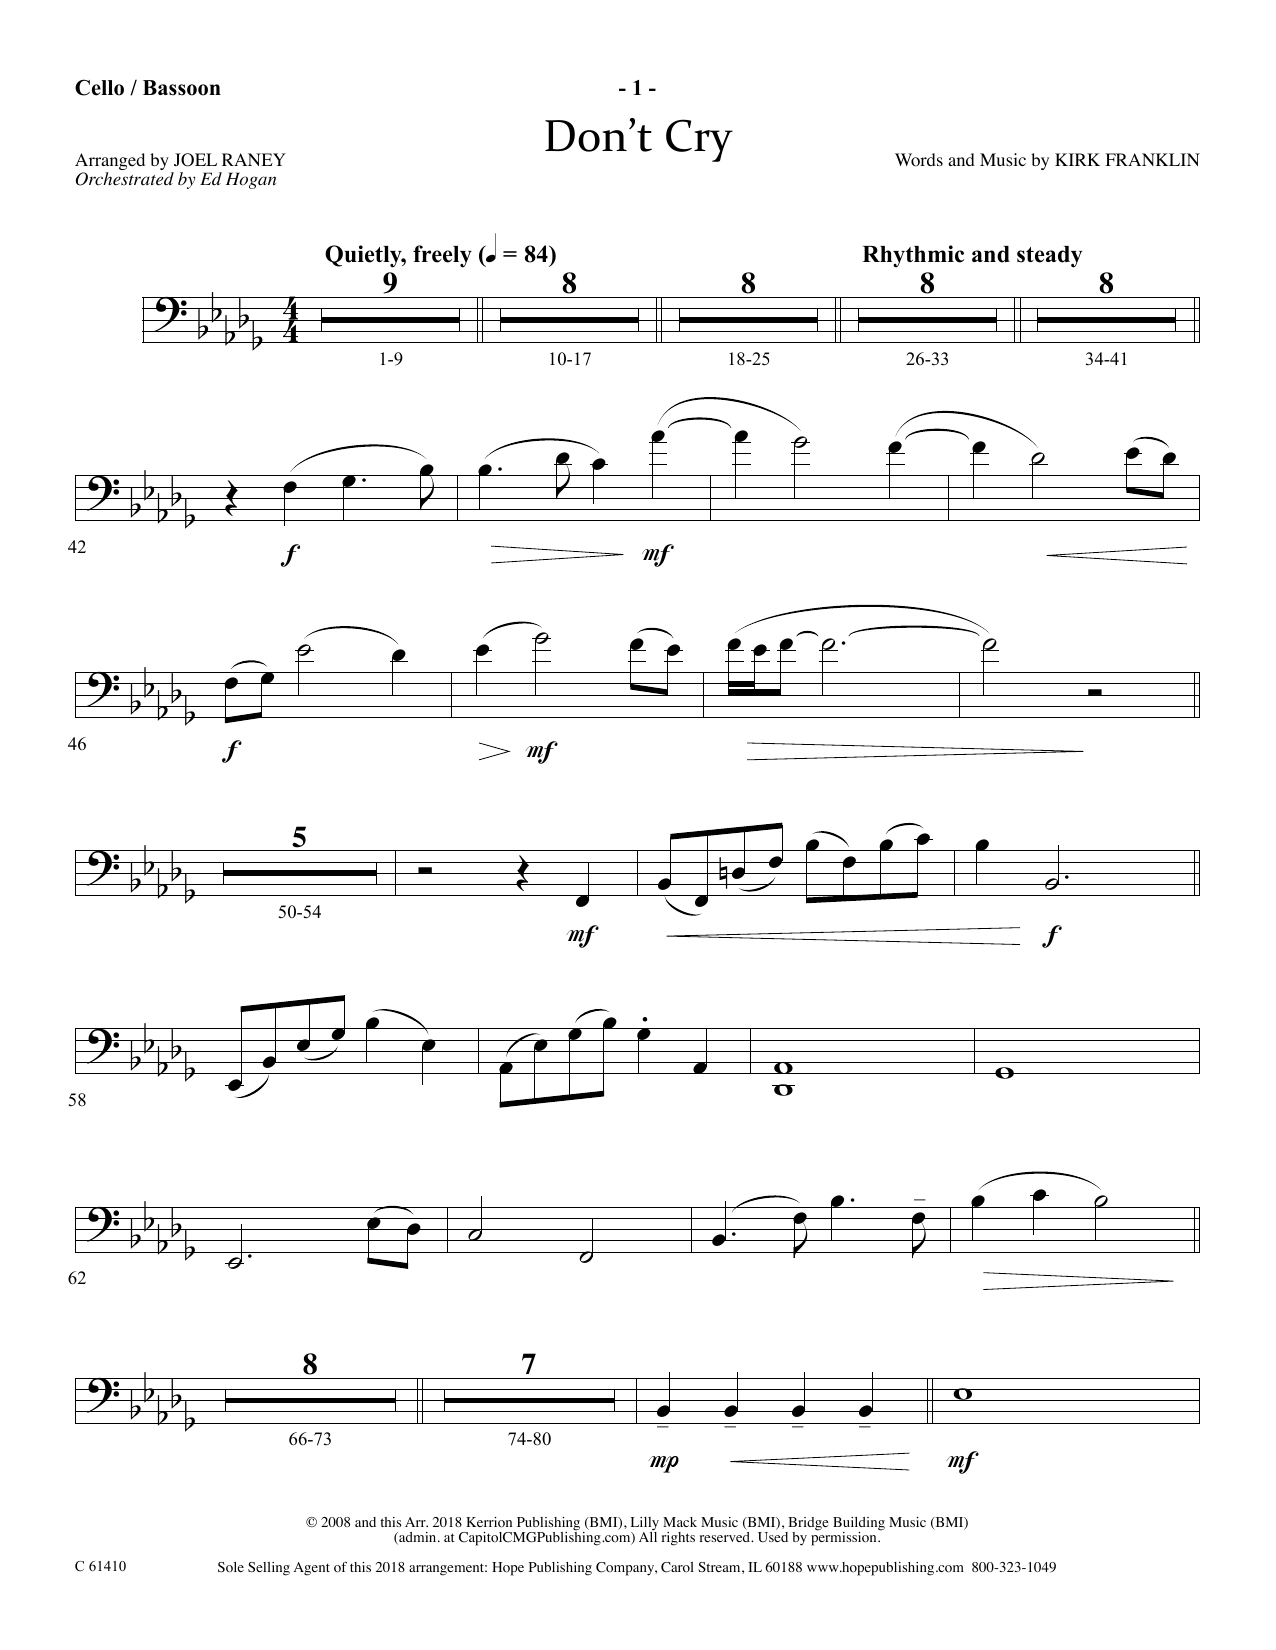 Download Joel Raney Don't Cry - Cello/Bassoon Sheet Music